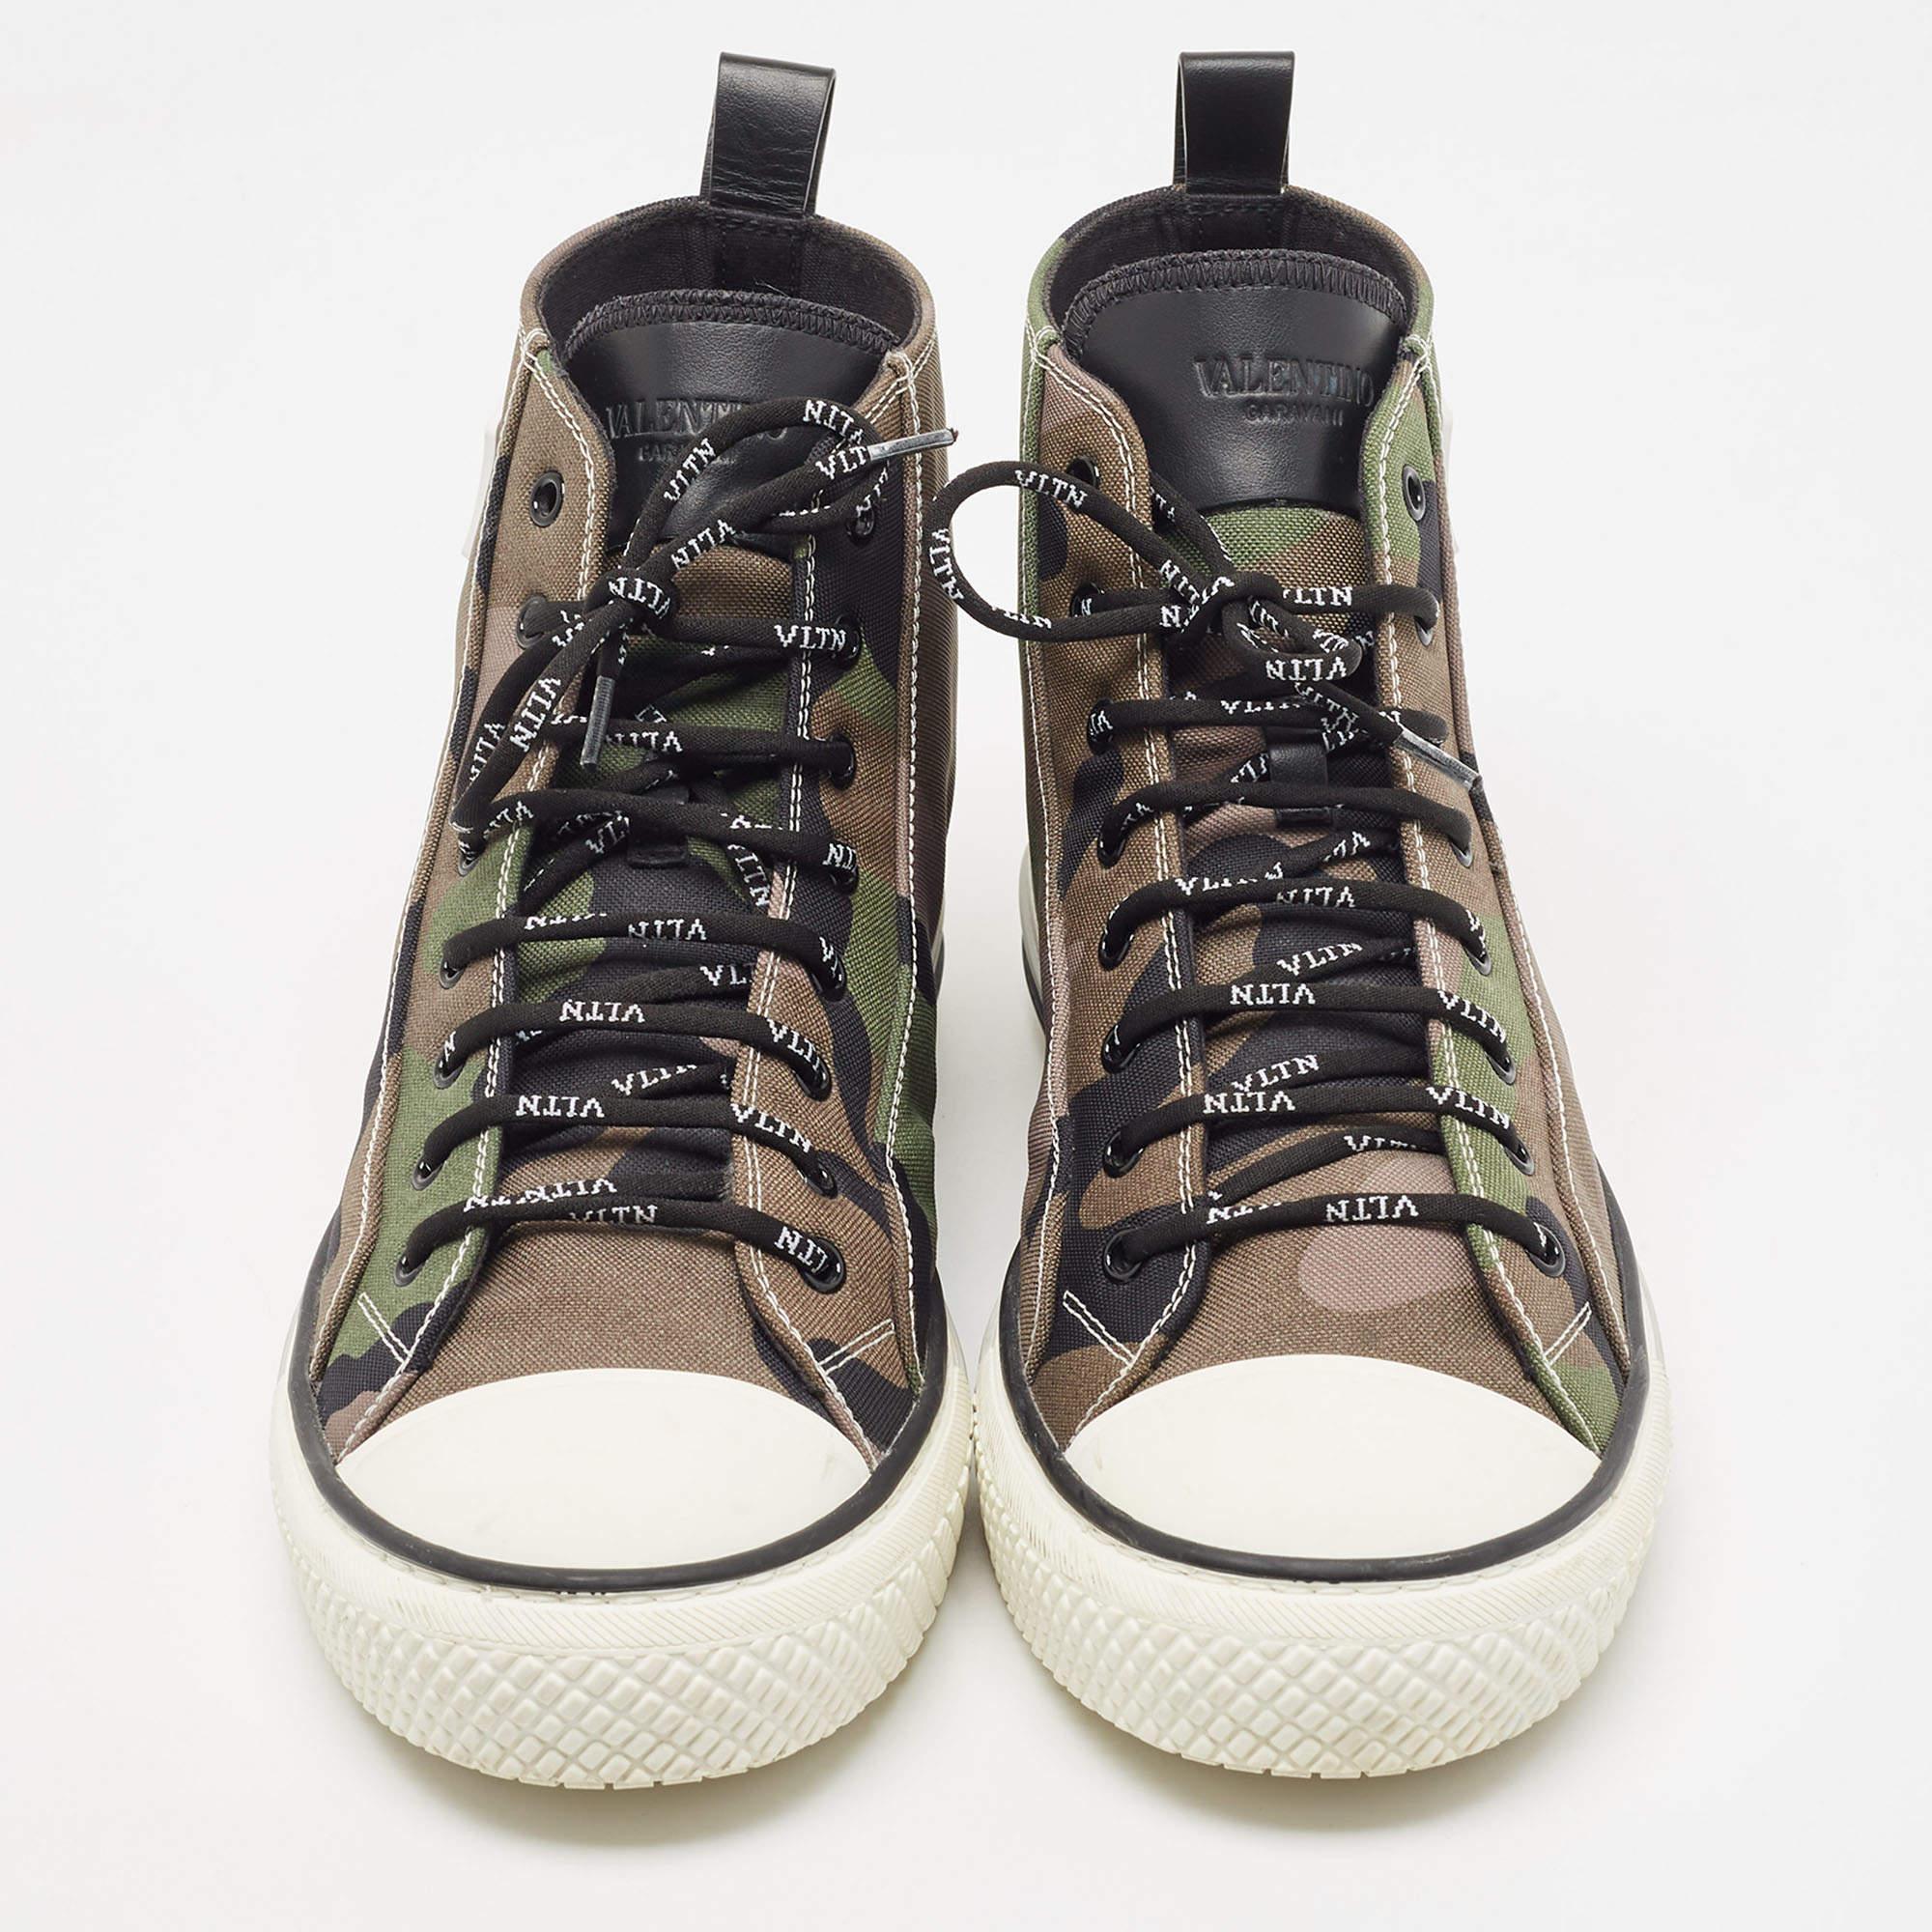 Elevate your footwear game with these Valentino sneakers. Combining high-end aesthetics and unmatched comfort, these sneakers are a symbol of modern luxury and impeccable taste.

Includes: Original Dustbag, Original Box, Info Booklet, Extra Laces